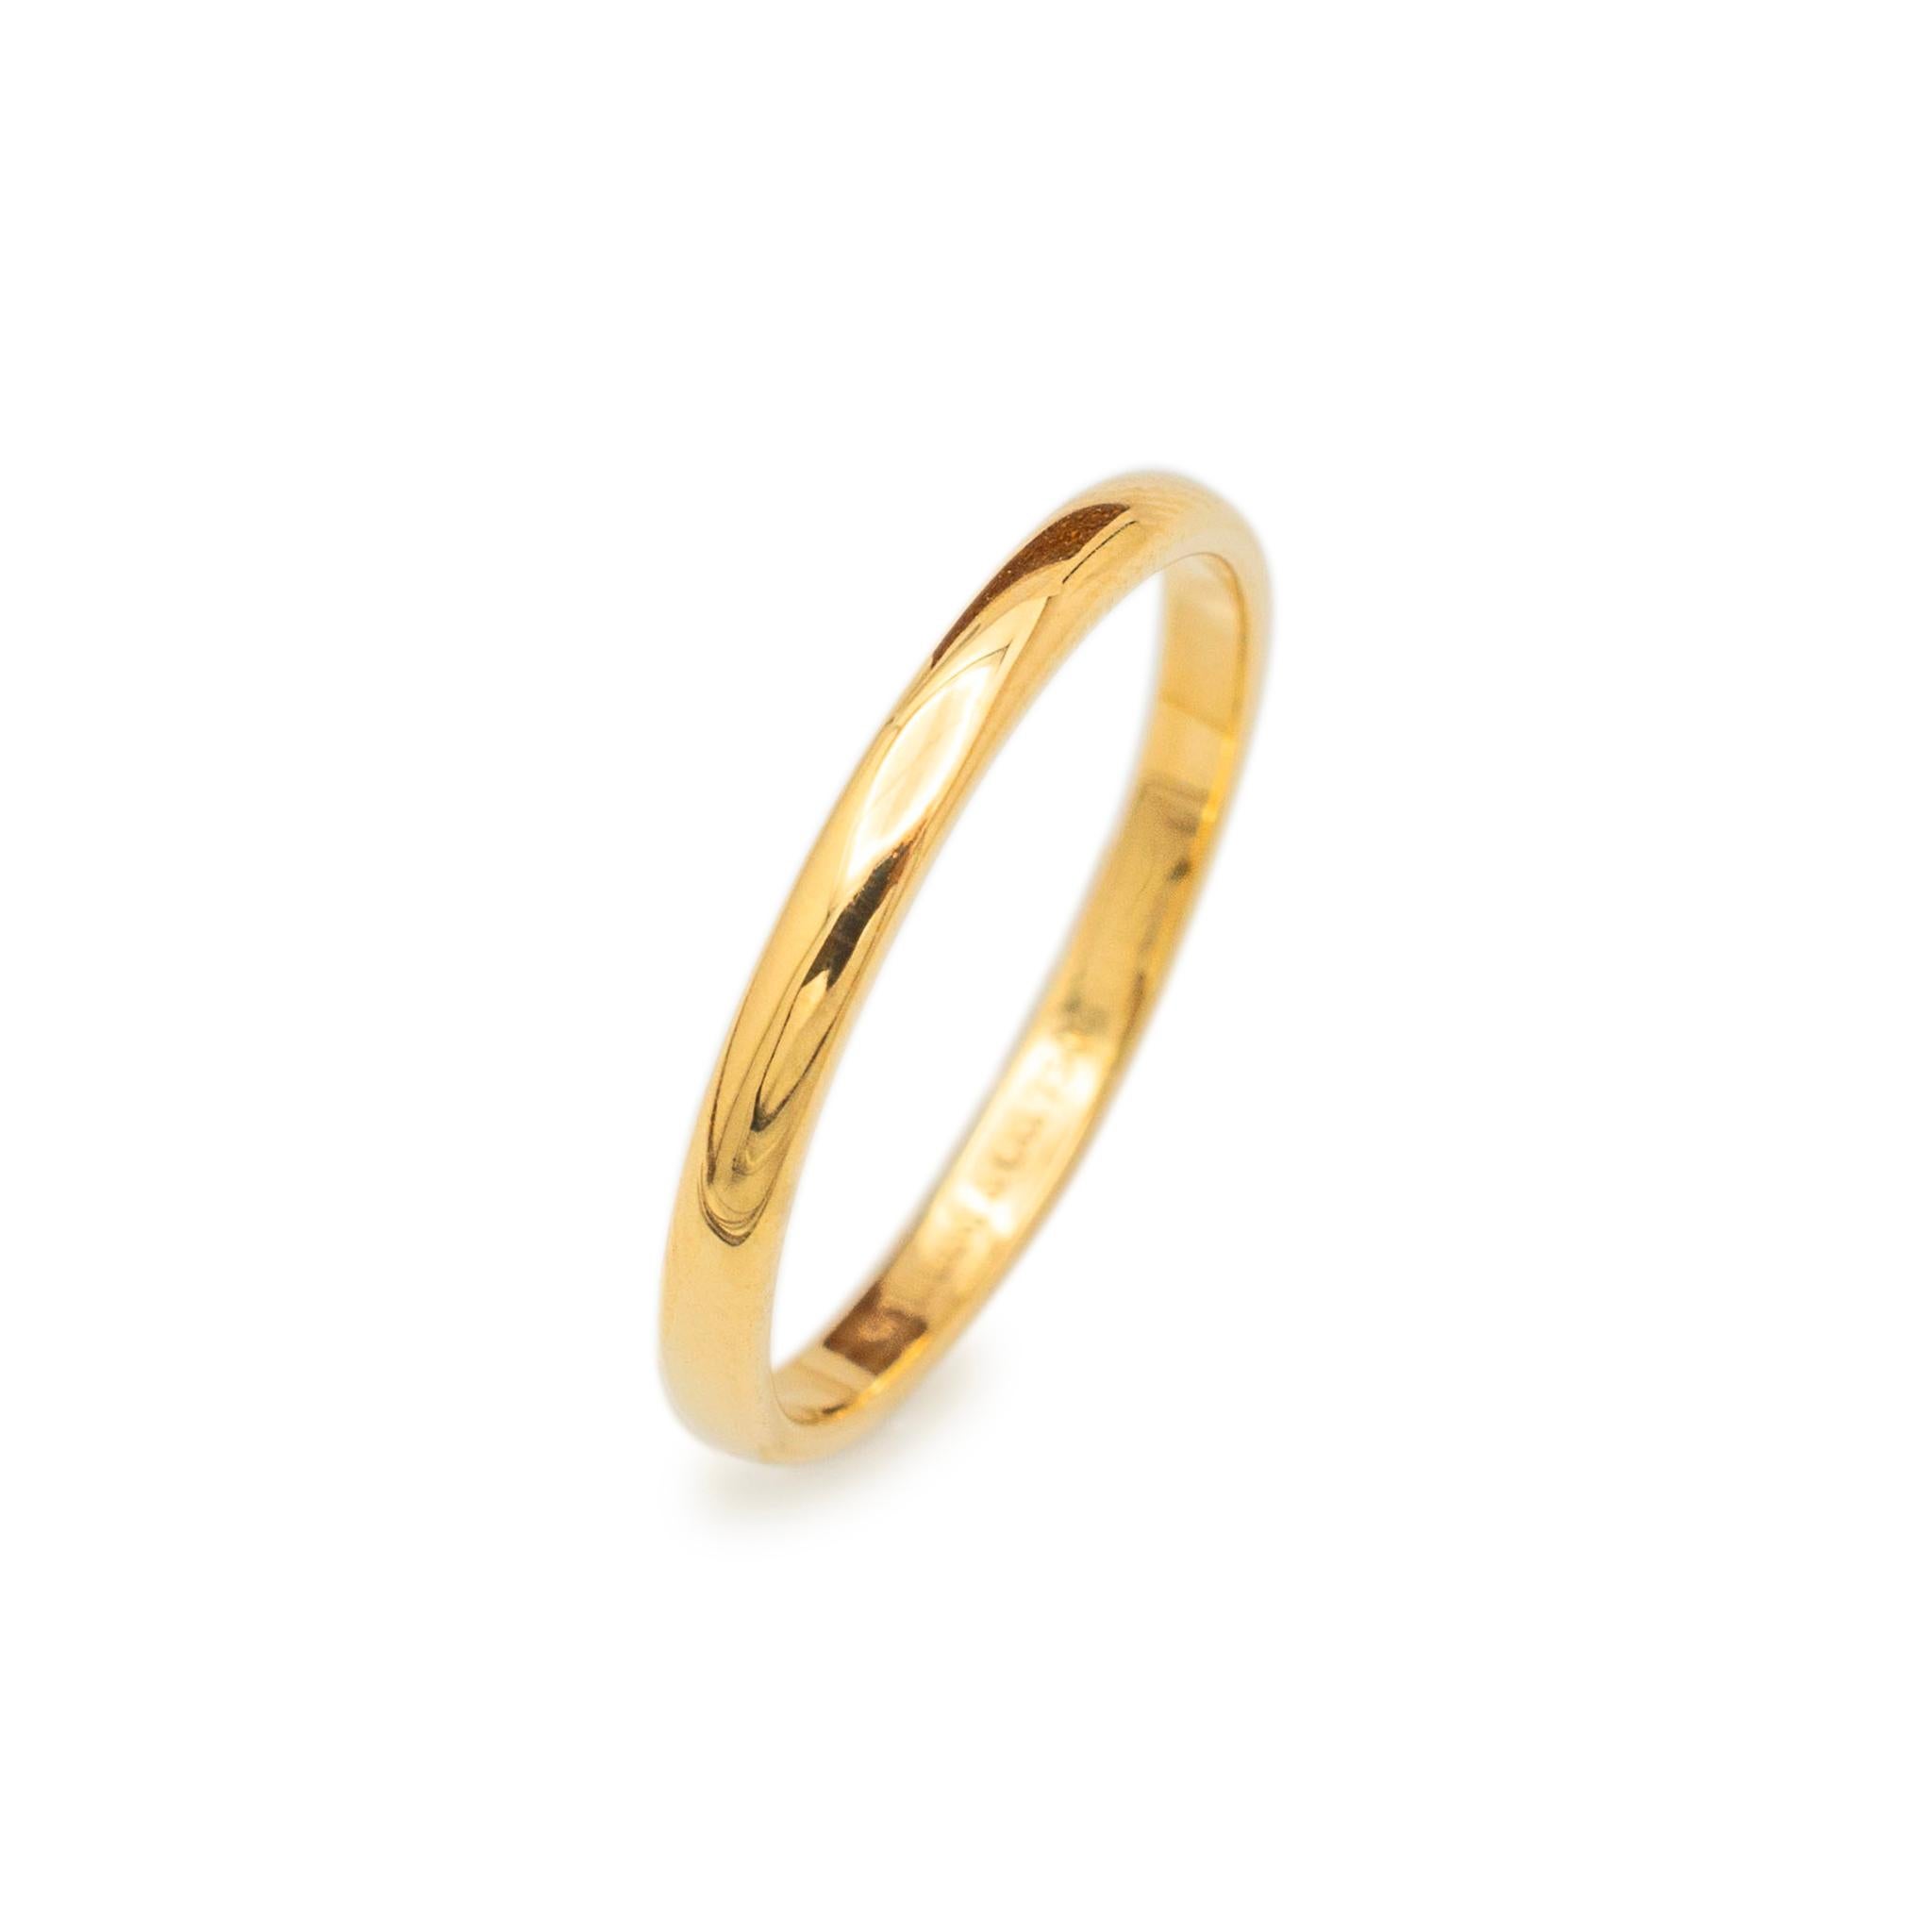 Brand: Tiffany & Co.

Gender: Ladies

Metal Type: 18K Yellow Gold

Size: 6.5

Shank Maximum Width: 2.00 mm

Weight: 1.77 grams

Ladies 18K yellow gold wedding band with a half-round shank. Engraved with 